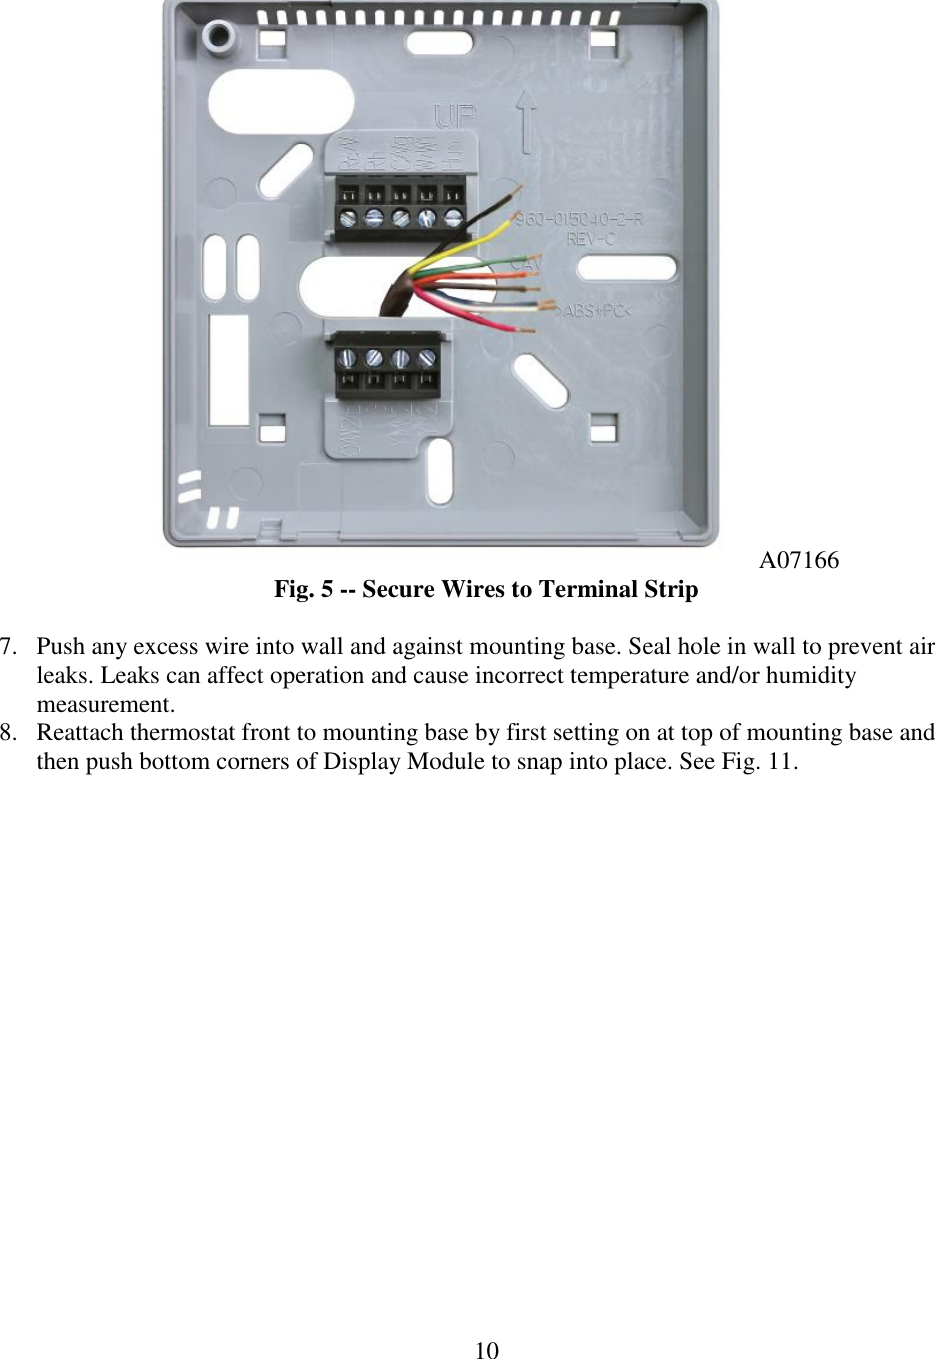 10  A07166 Fig. 5 -- Secure Wires to Terminal Strip  7. Push any excess wire into wall and against mounting base. Seal hole in wall to prevent air leaks. Leaks can affect operation and cause incorrect temperature and/or humidity measurement. 8. Reattach thermostat front to mounting base by first setting on at top of mounting base and then push bottom corners of Display Module to snap into place. See Fig. 11. 